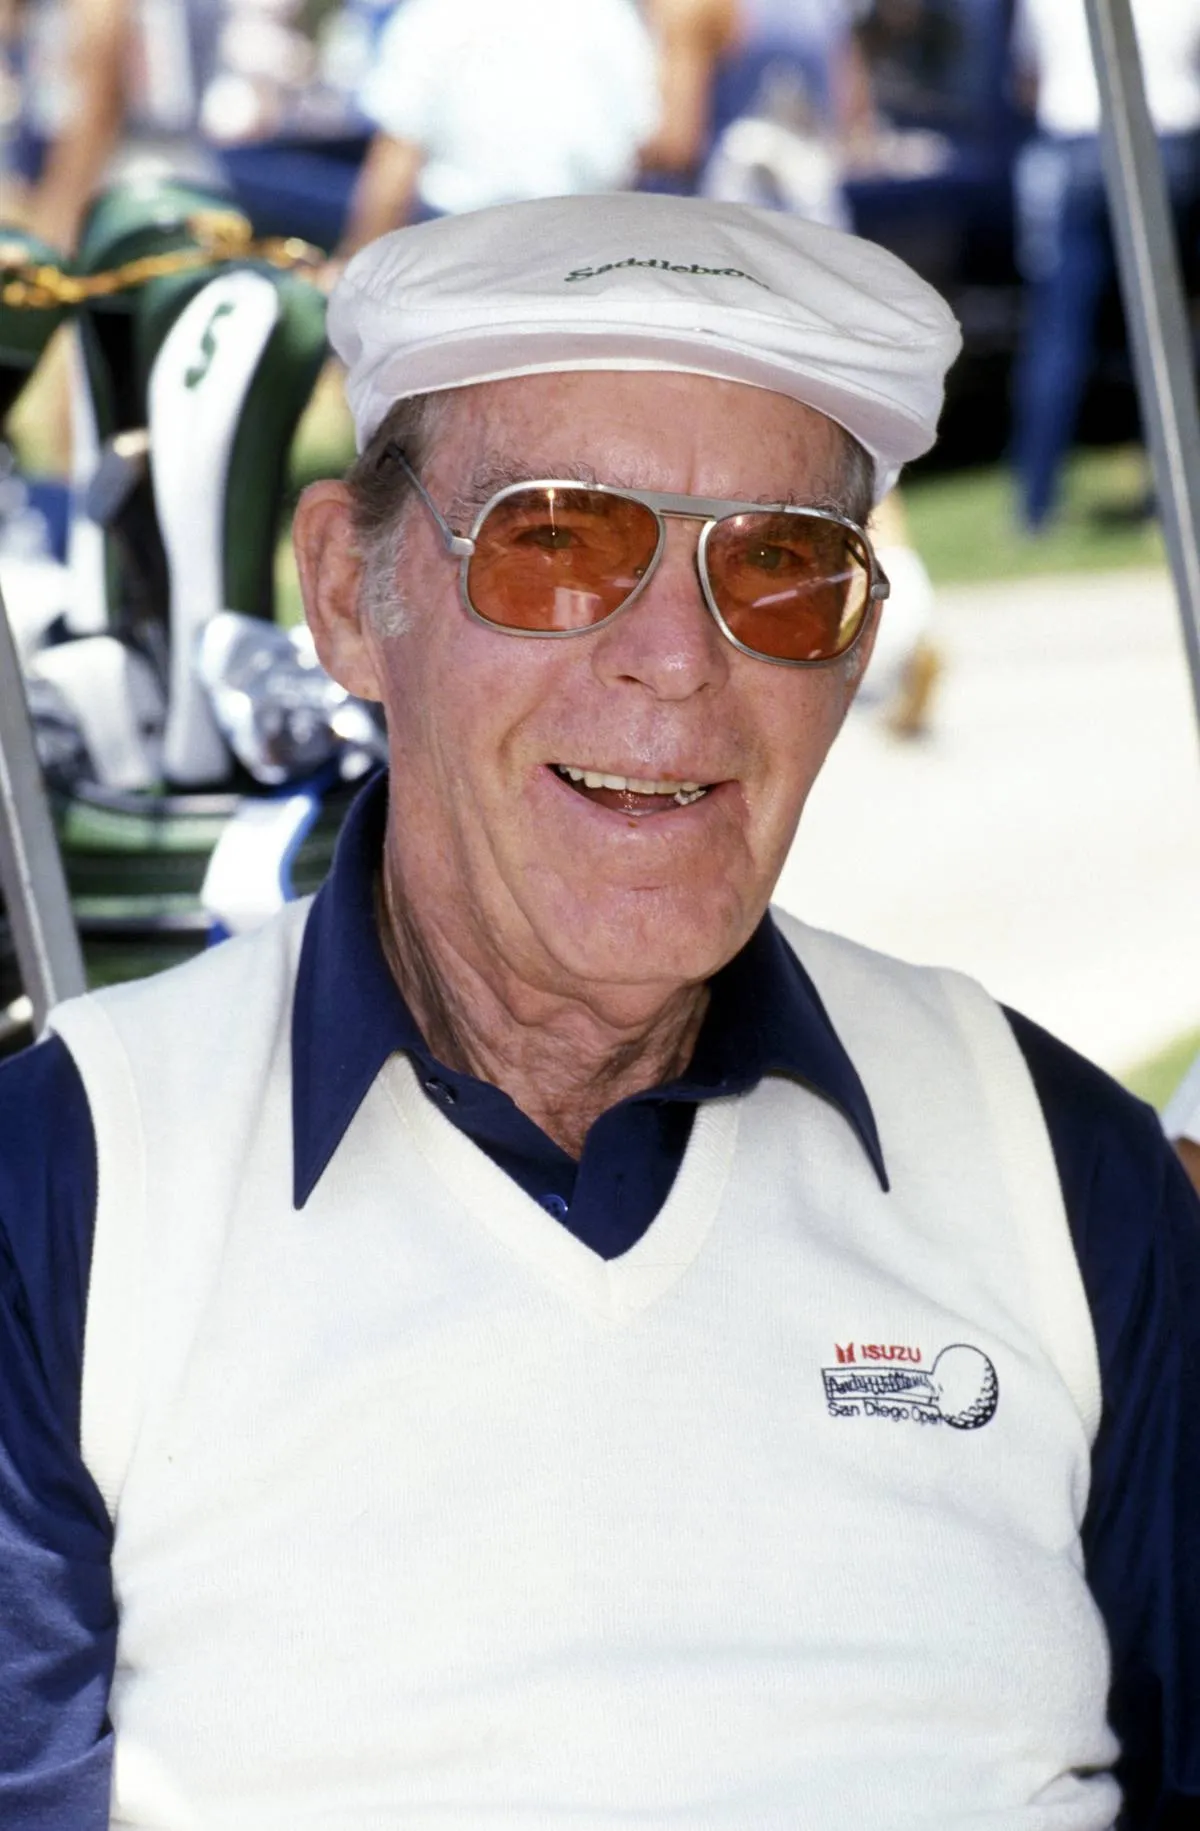 Fred MacMurray at the Bevelry Hills Country Club - September 21, 1985